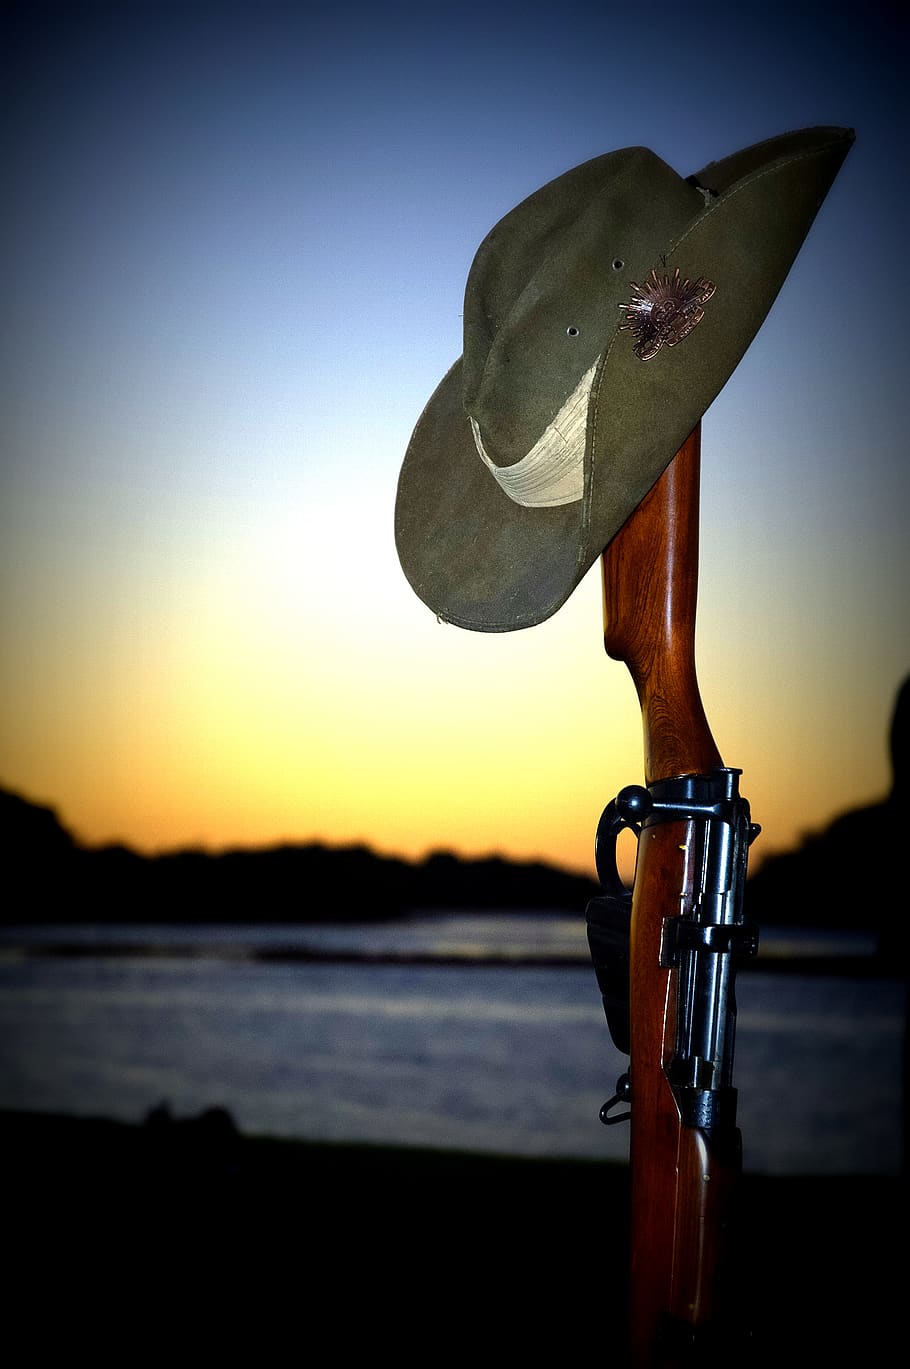 anzac, soldier, ww1, war, remembrance, sunset, sky, water, focus on foreground